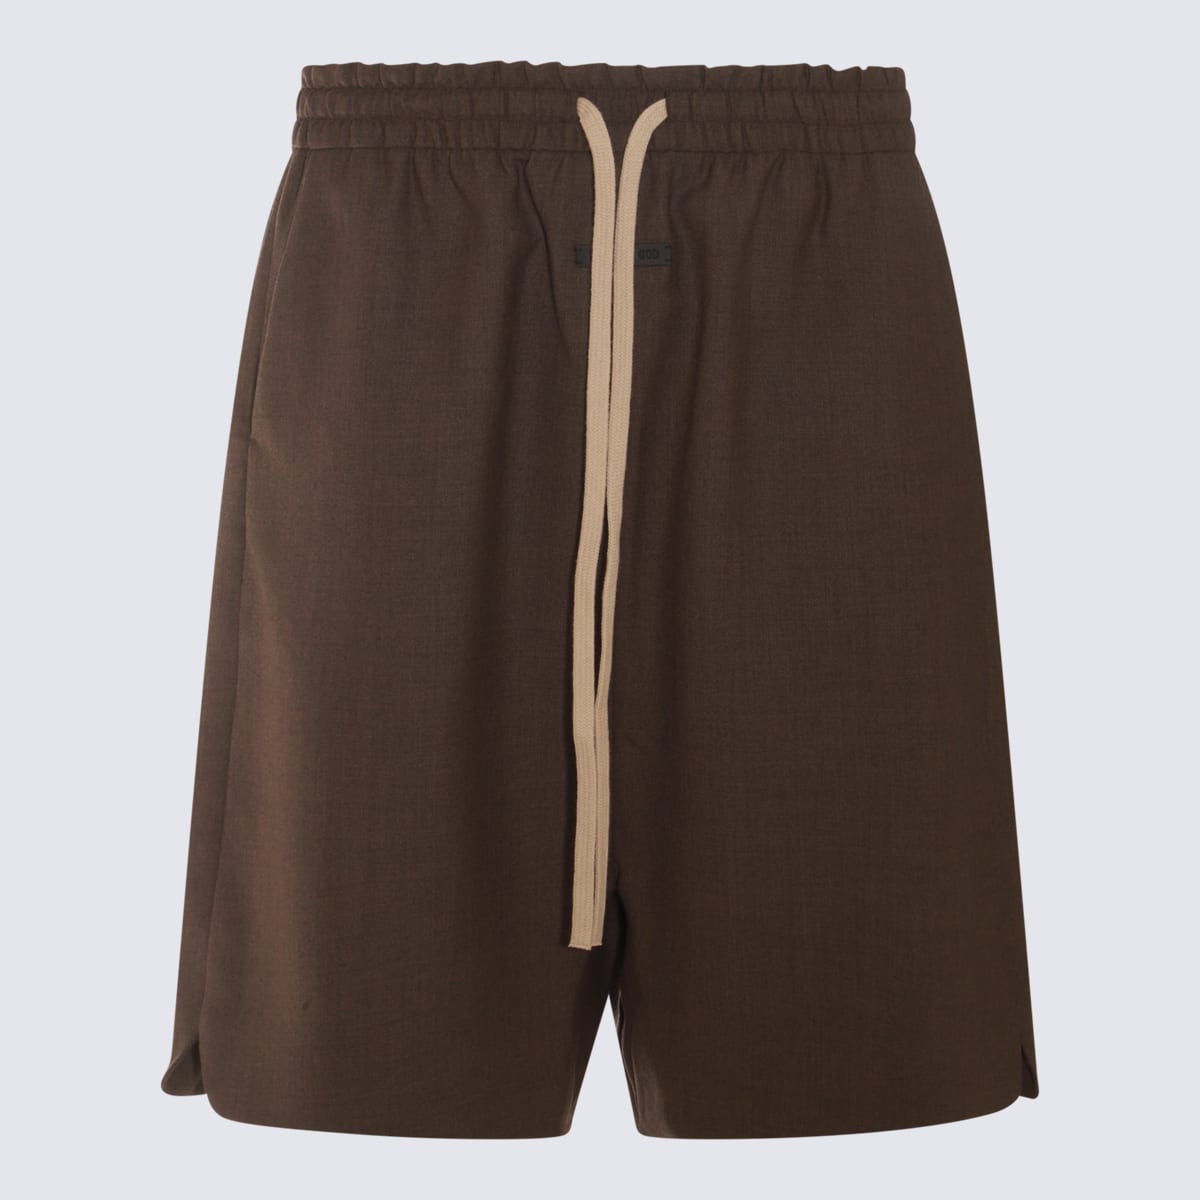 FEAR OF GOD BROWN COTTON SHORTS